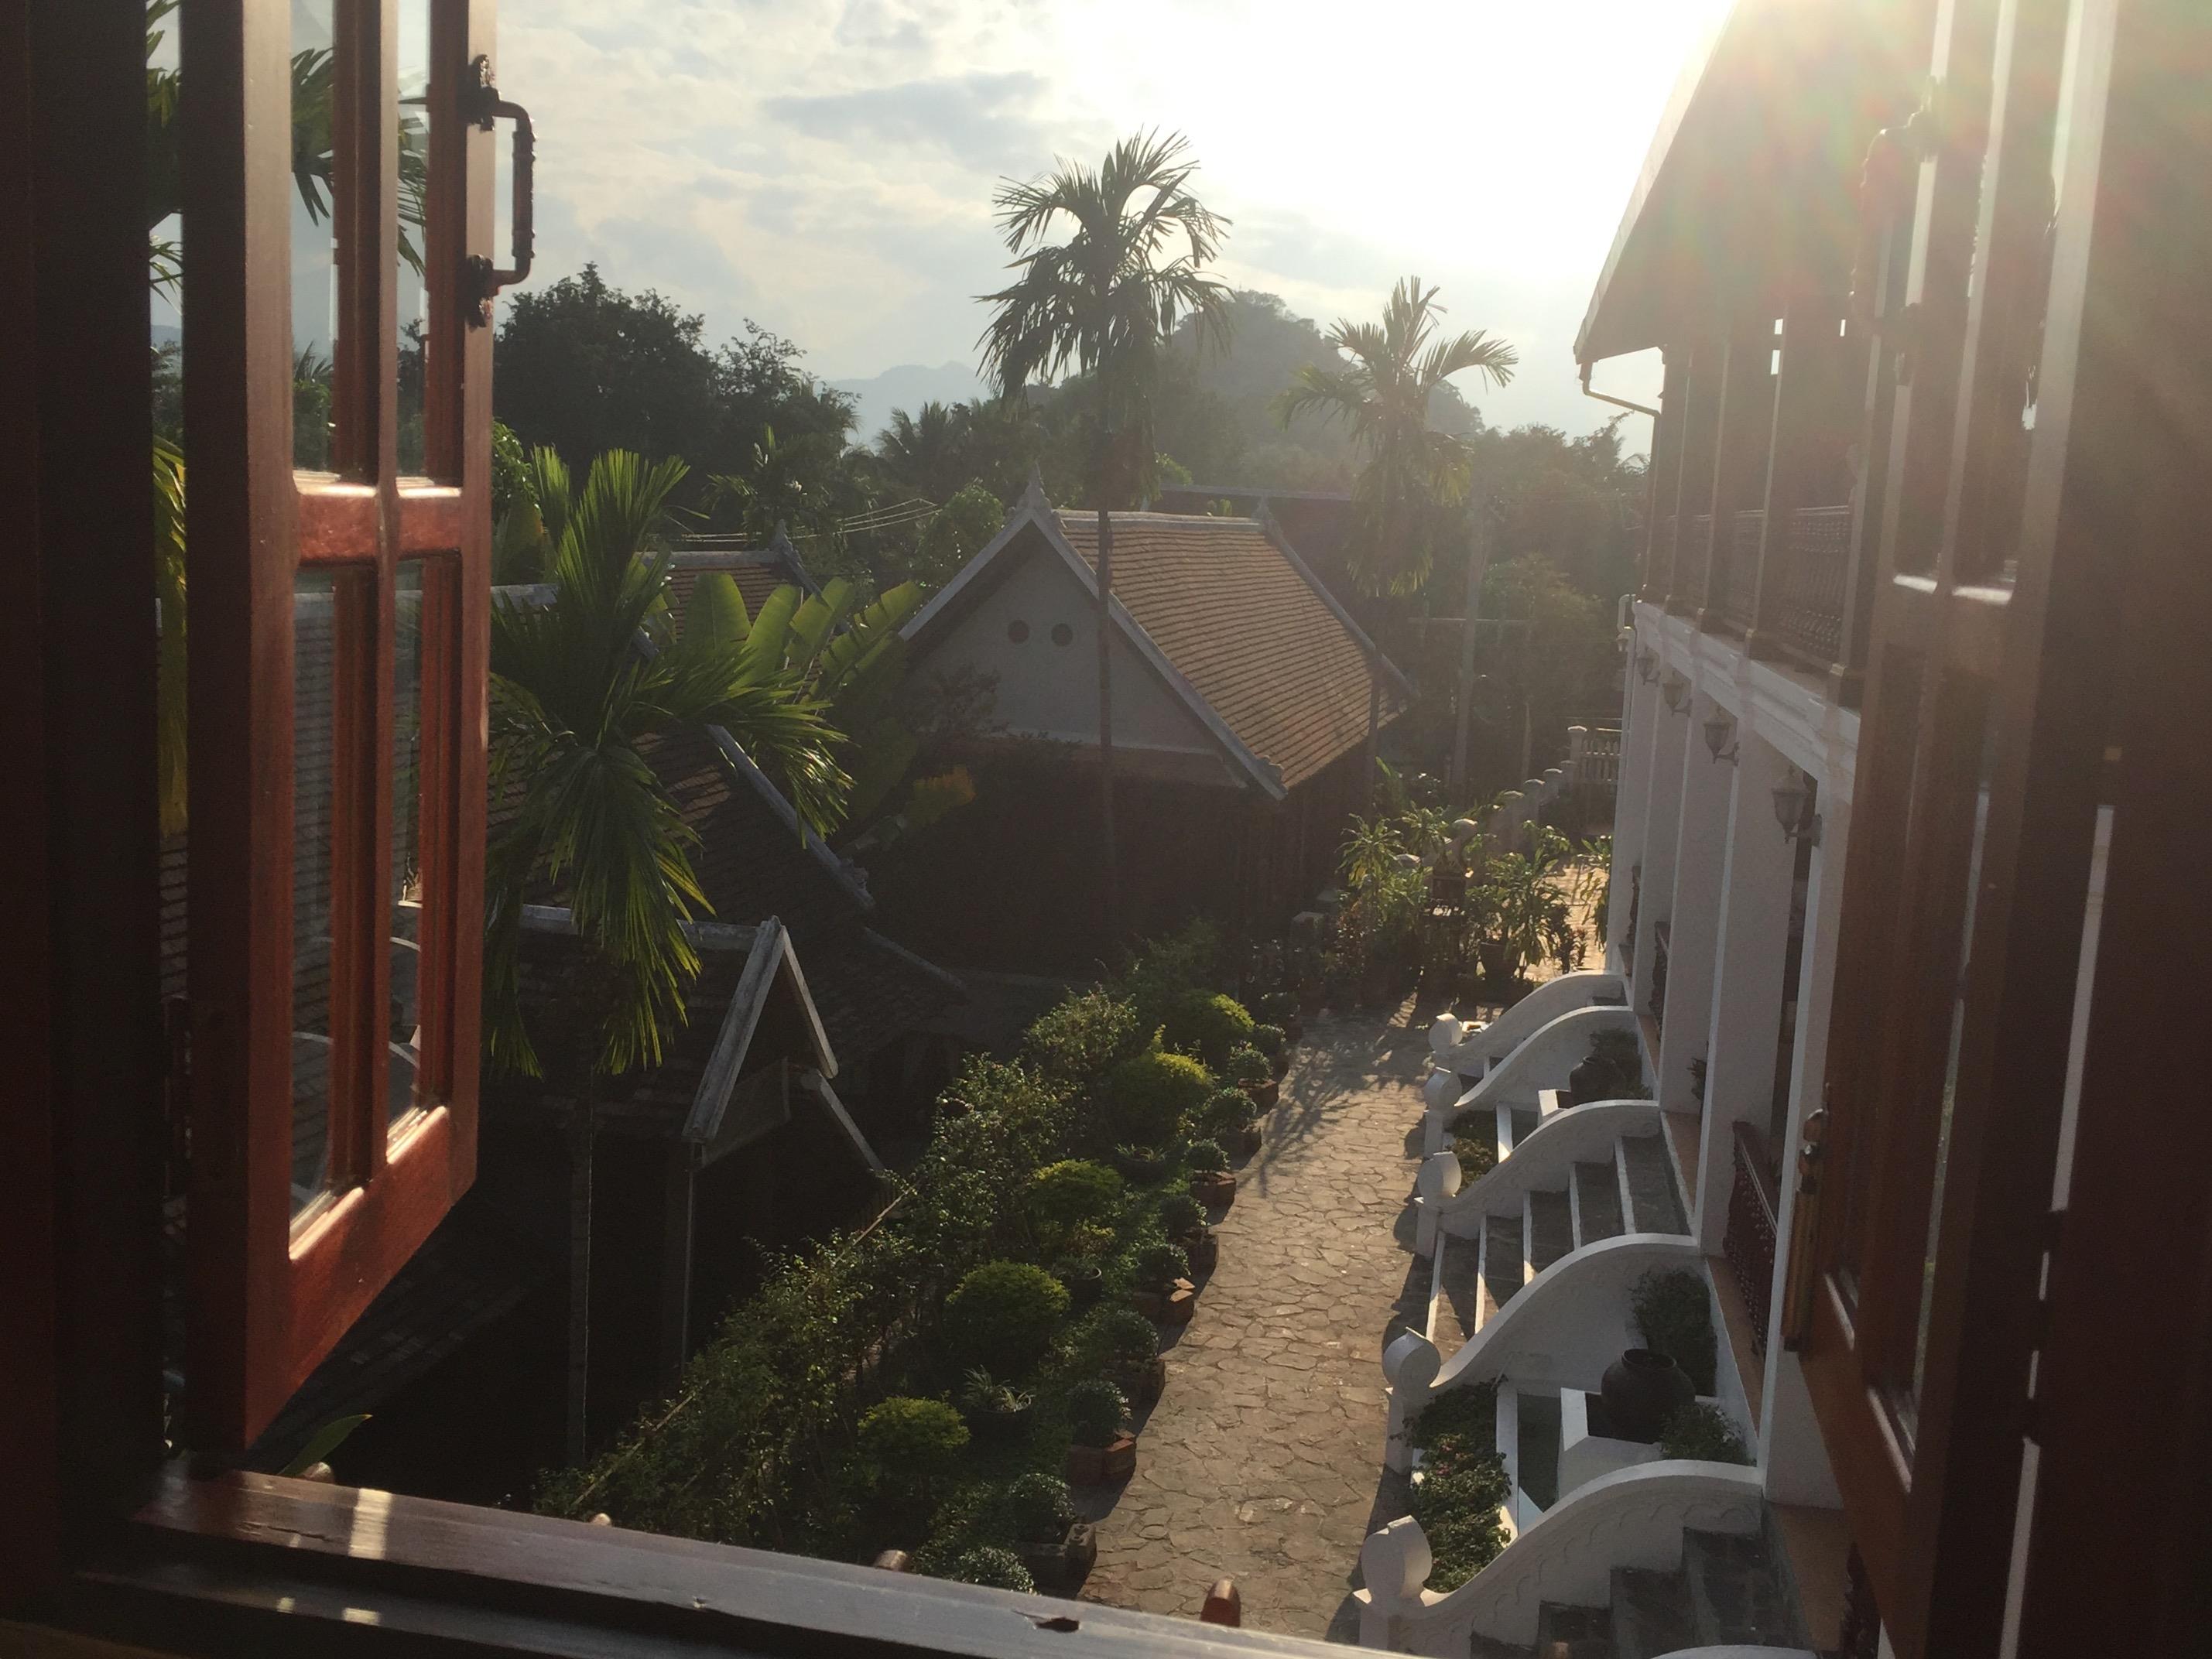 The View Pavilion Hotel Luang Prabang FAQ 2016, What facilities are there in The View Pavilion Hotel Luang Prabang 2016, What Languages Spoken are Supported in The View Pavilion Hotel Luang Prabang 2016, Which payment cards are accepted in The View Pavilion Hotel Luang Prabang , Luang Prabang The View Pavilion Hotel room facilities and services Q&A 2016, Luang Prabang The View Pavilion Hotel online booking services 2016, Luang Prabang The View Pavilion Hotel address 2016, Luang Prabang The View Pavilion Hotel telephone number 2016,Luang Prabang The View Pavilion Hotel map 2016, Luang Prabang The View Pavilion Hotel traffic guide 2016, how to go Luang Prabang The View Pavilion Hotel, Luang Prabang The View Pavilion Hotel booking online 2016, Luang Prabang The View Pavilion Hotel room types 2016.